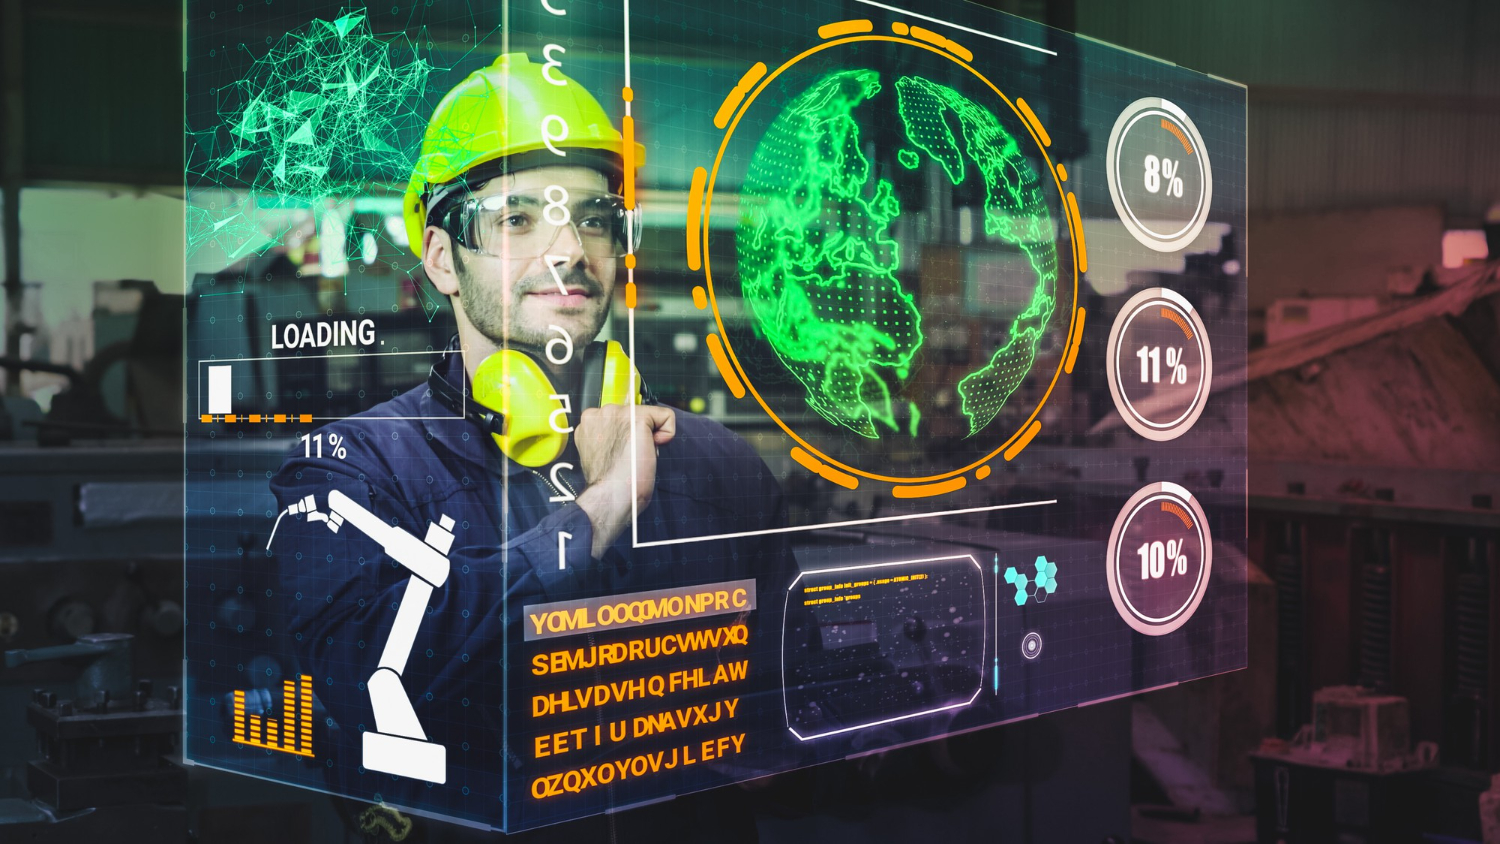 Will the intervention of immersive technology help reduce risk within high hazard sectors?